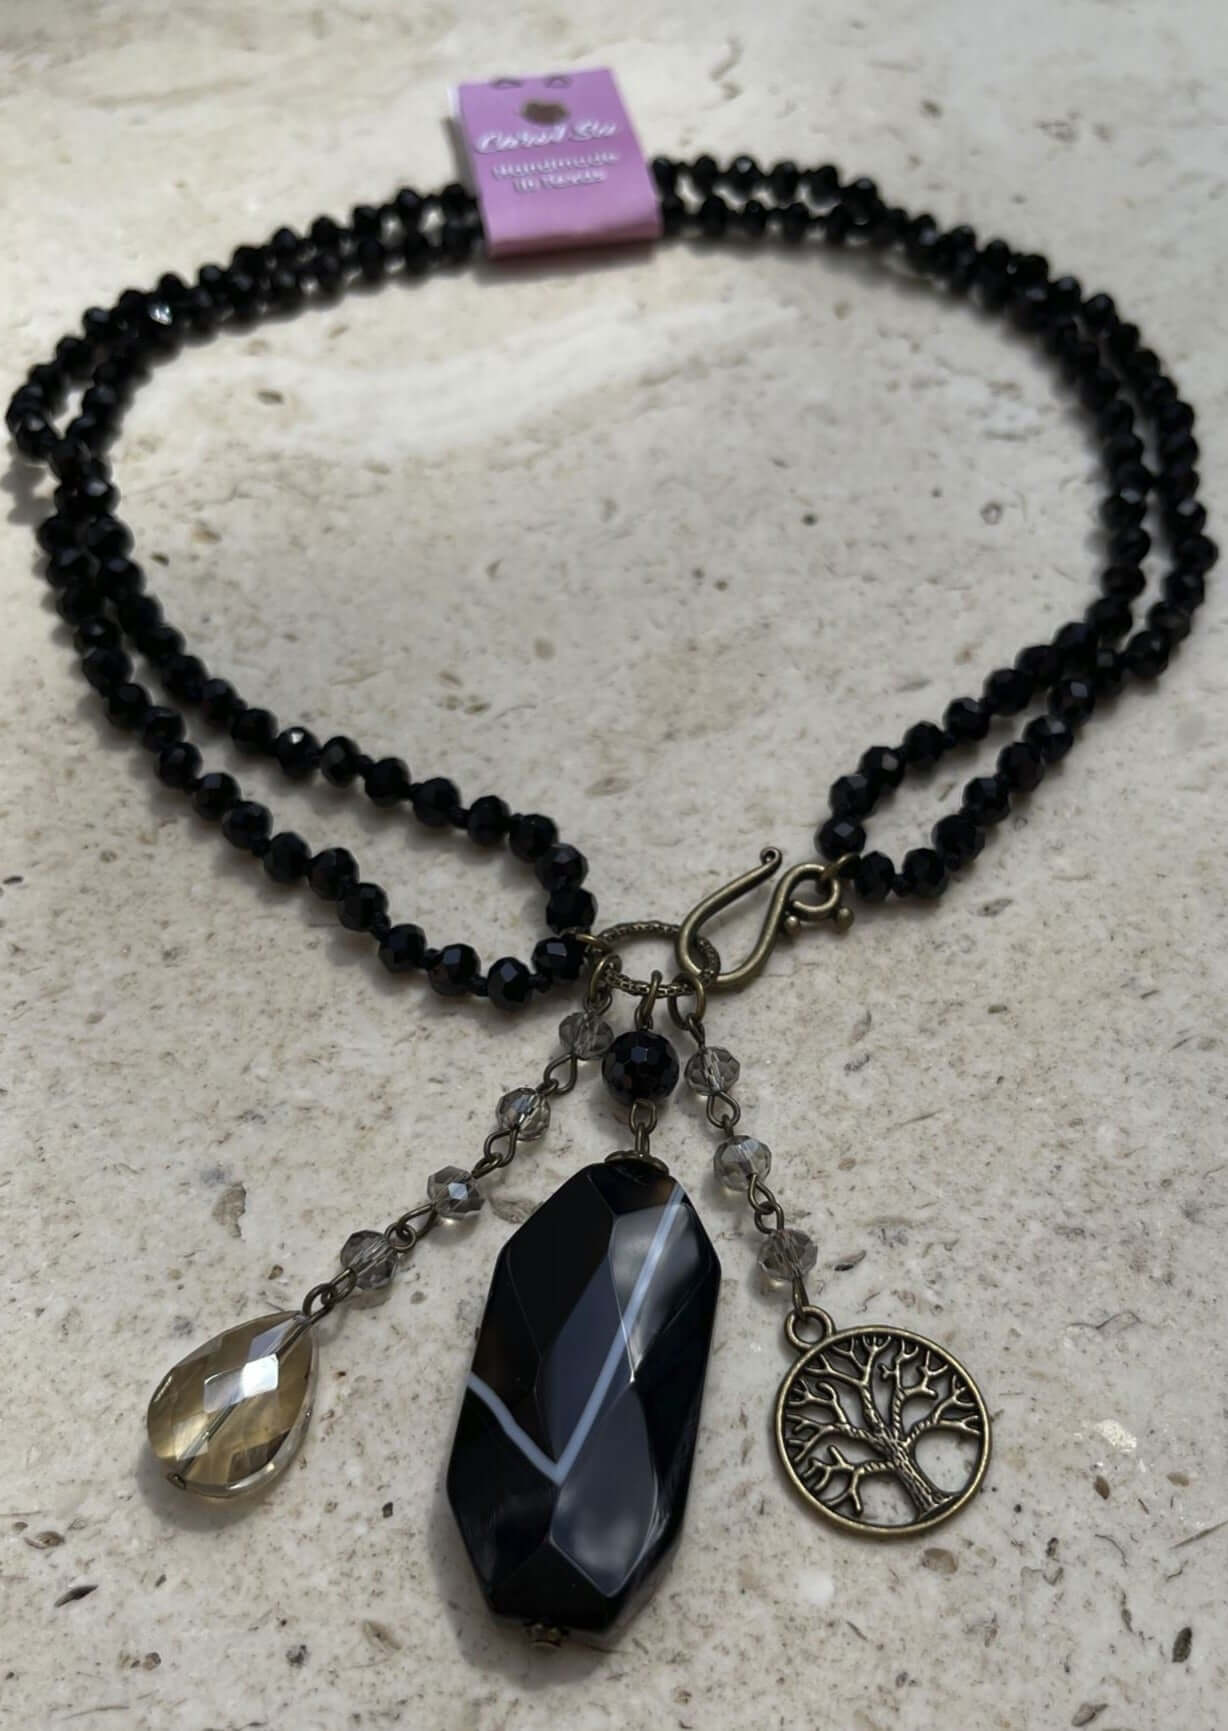 Black Onyx Natural Gemstone Pendant Charm Necklace | Made in USA Fashion Jewelry Handmade in Texas by Carol Su | Women's Made in America Boutique